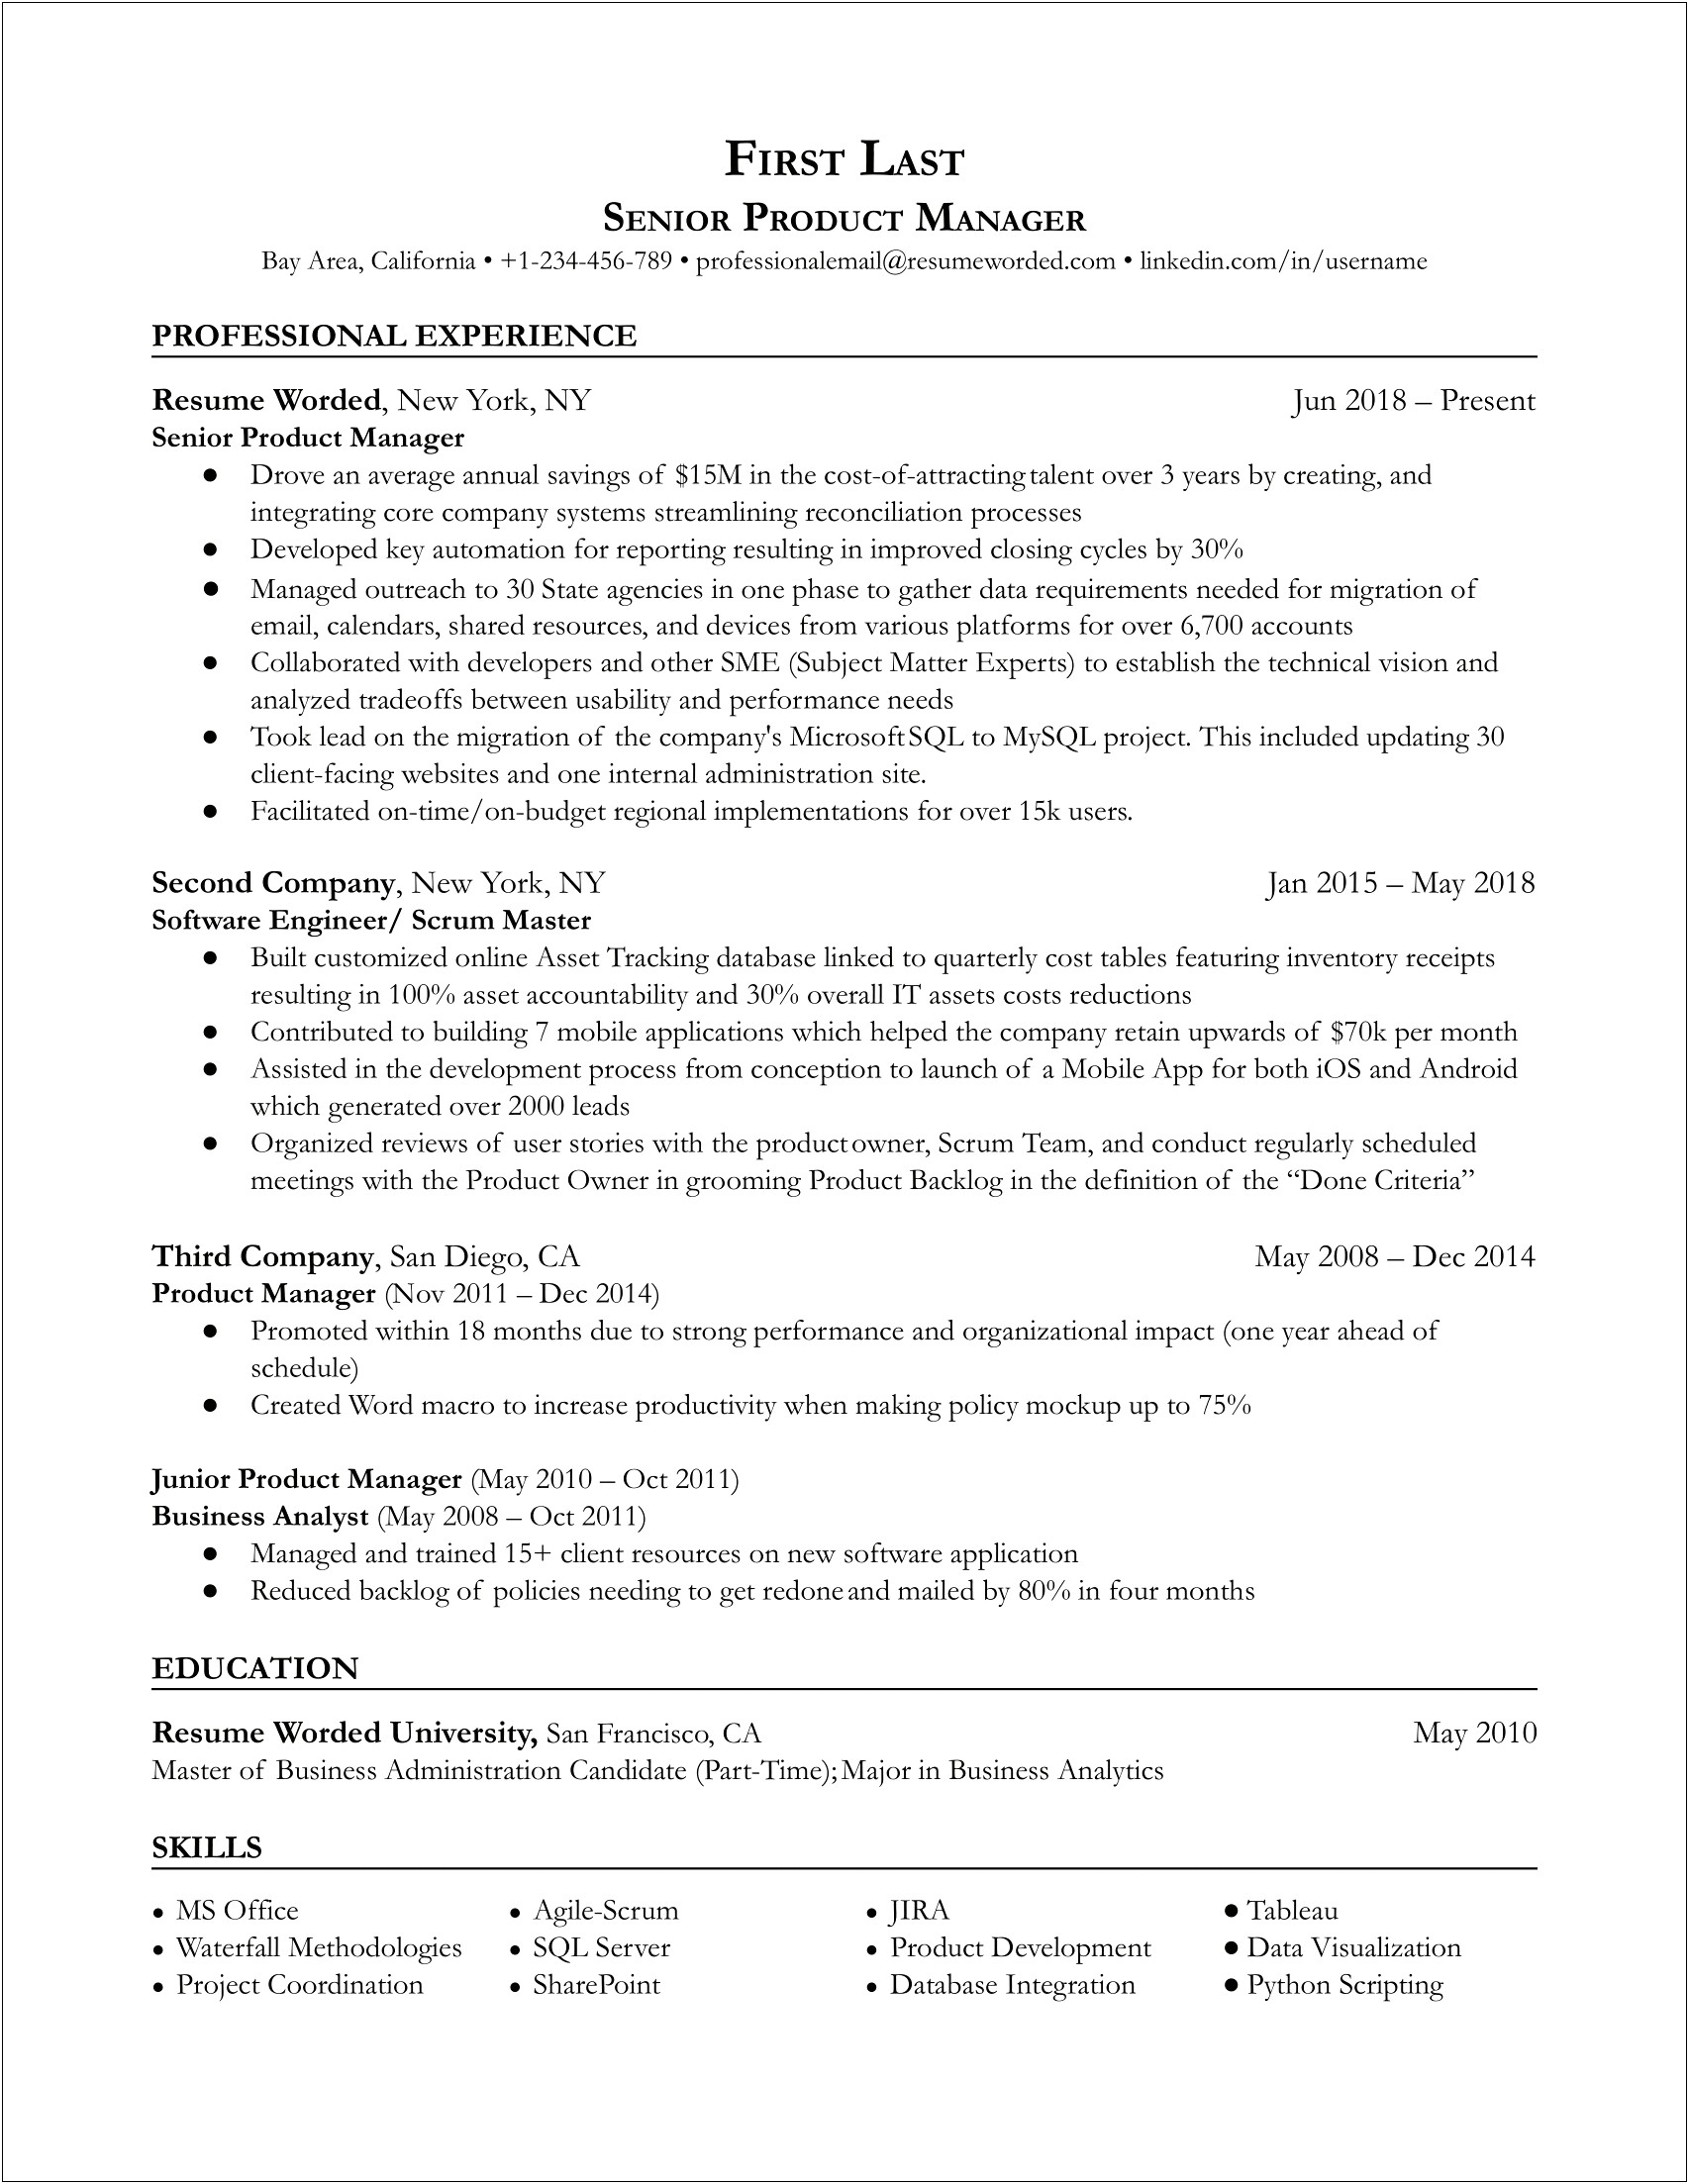 Senior Product Manager Resume Summary Great Examples